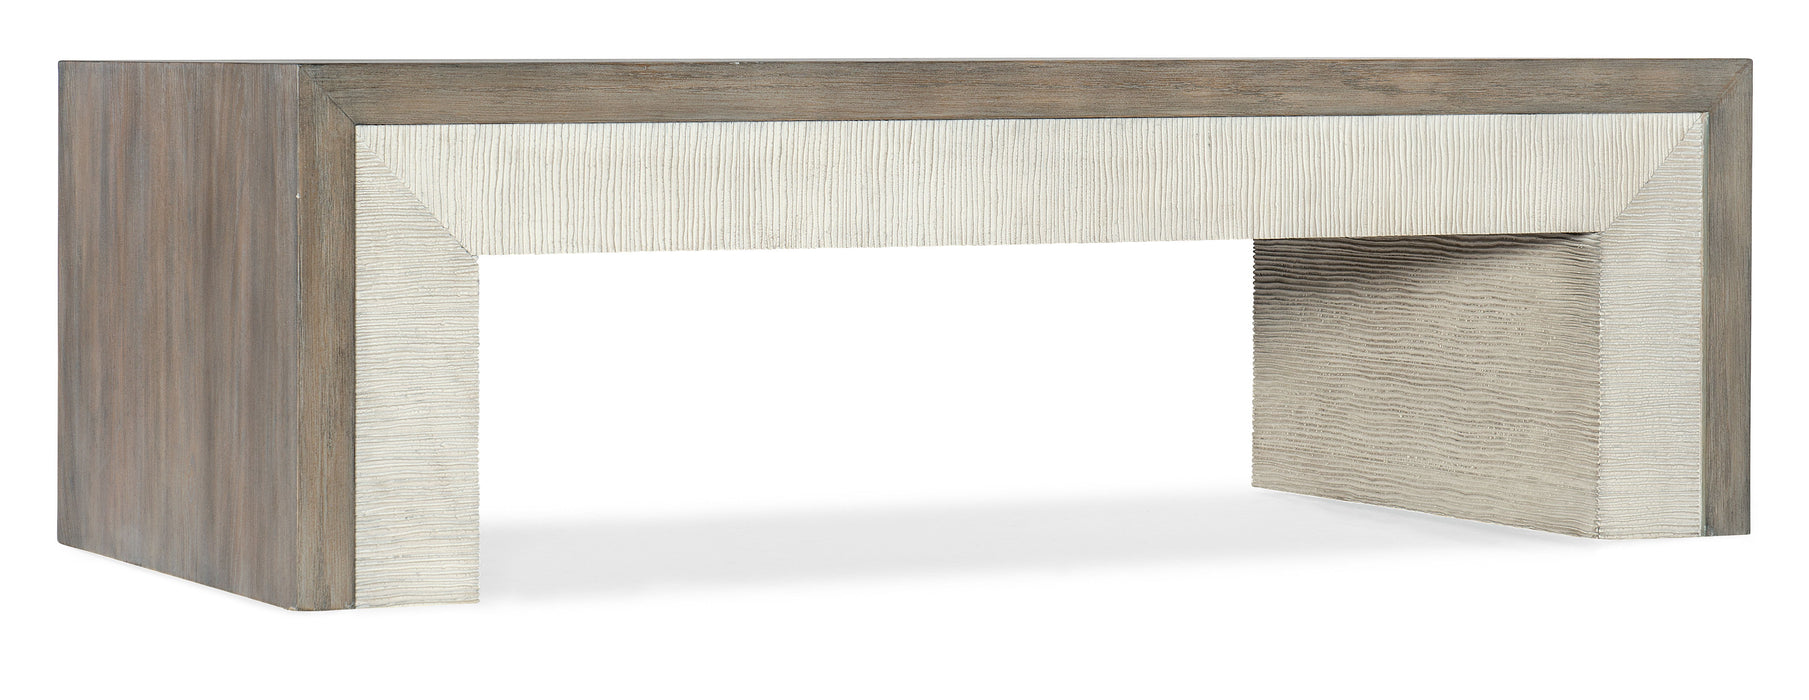 Serenity - Skipper Rectangle Cocktail Table